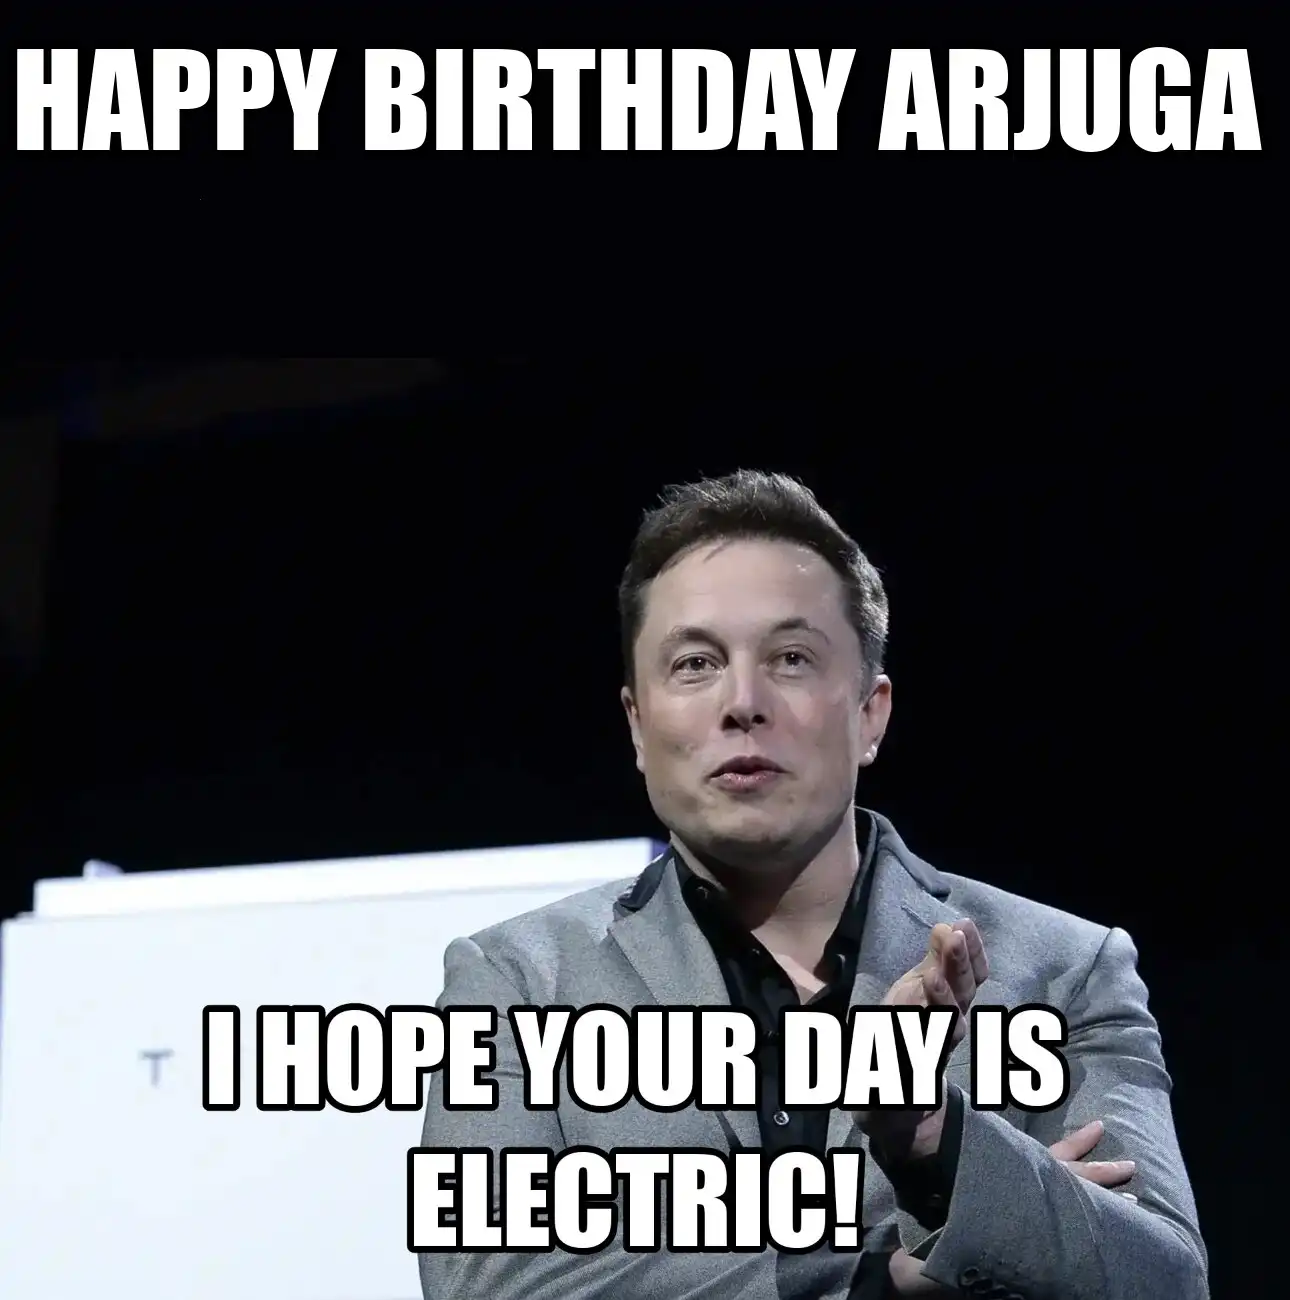 Happy Birthday Arjuga I Hope Your Day Is Electric Meme